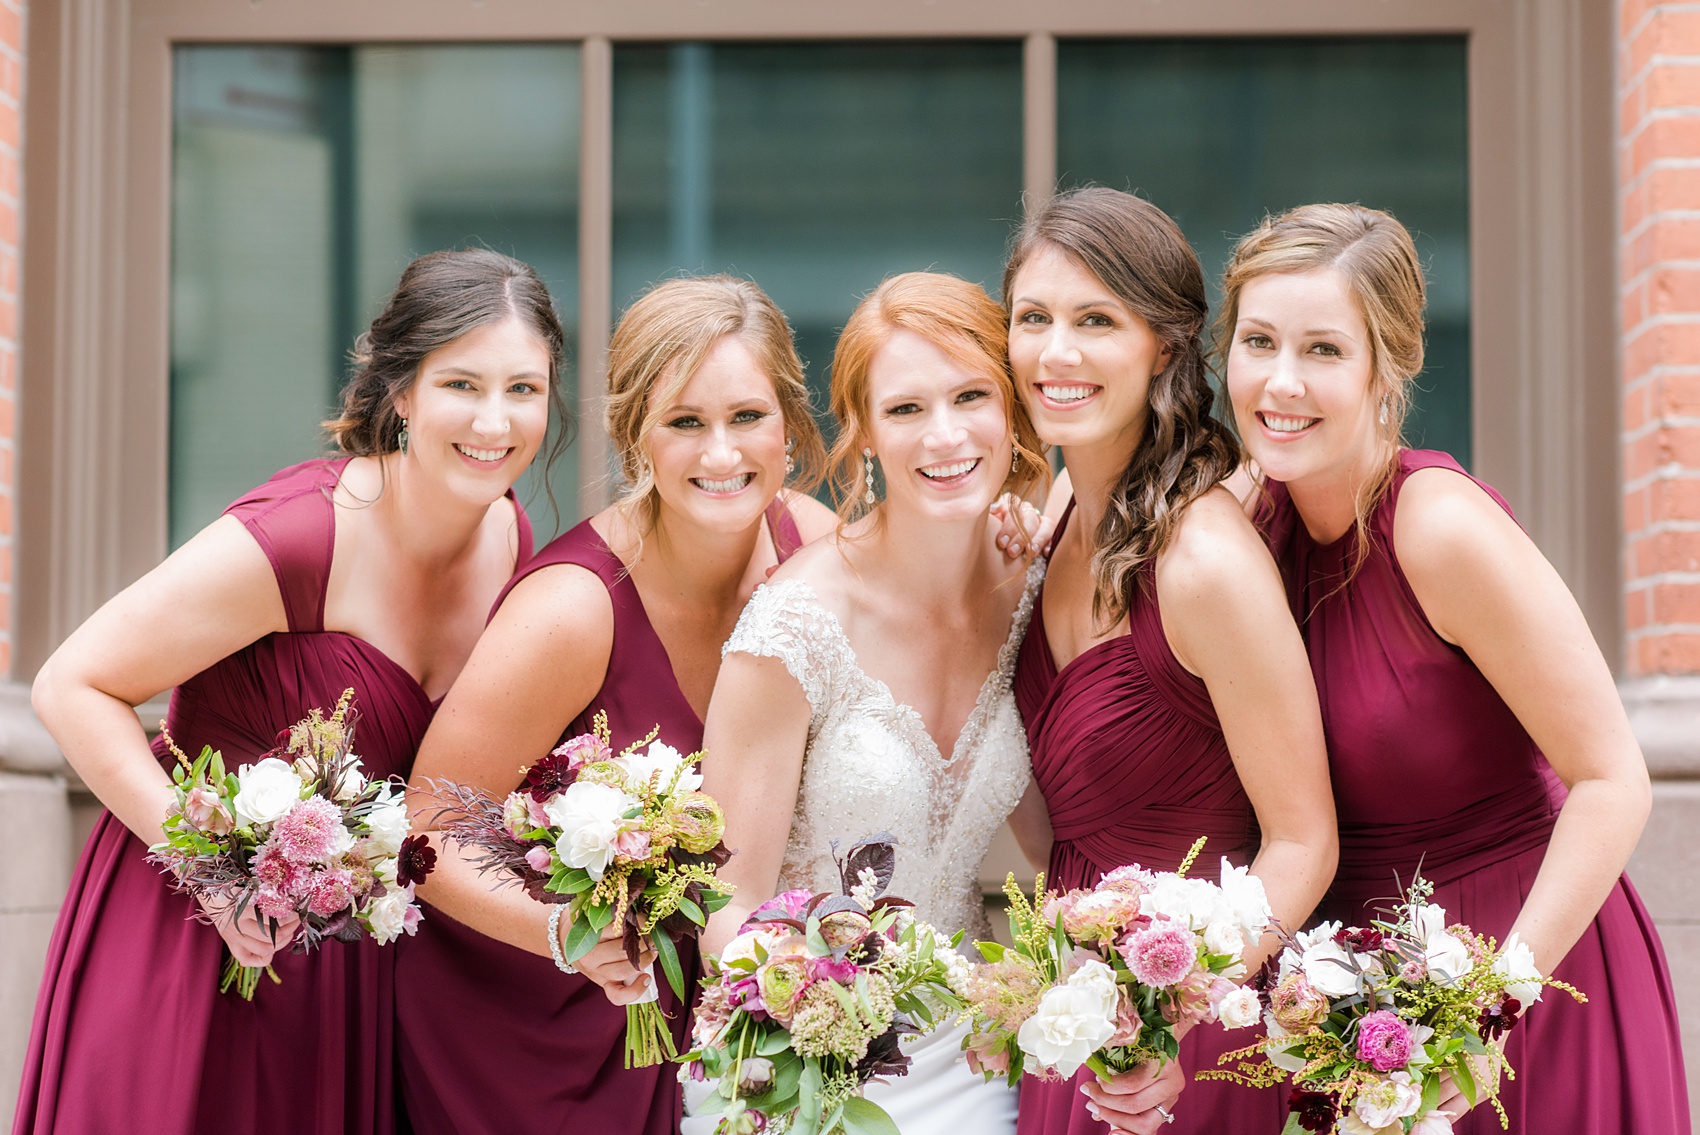 Photos of a NYC wedding venue, Tribeca Rooftop, by Mikkel Paige Photography. This ceremony and reception location has an outdoor space overlooking the Manhattan skyline. These pictures will provide inspiration in New York! The bride was surrounded by her bridesmaids in cranberry gowns, holding fall flowers. Click through for more details from this celebration! #TribecaRooftop #MikkelPaige #NYCwedding #NYCWeddingVenues #NYCWeddingPhotography #CranberryBridesmaids #FallBouquet